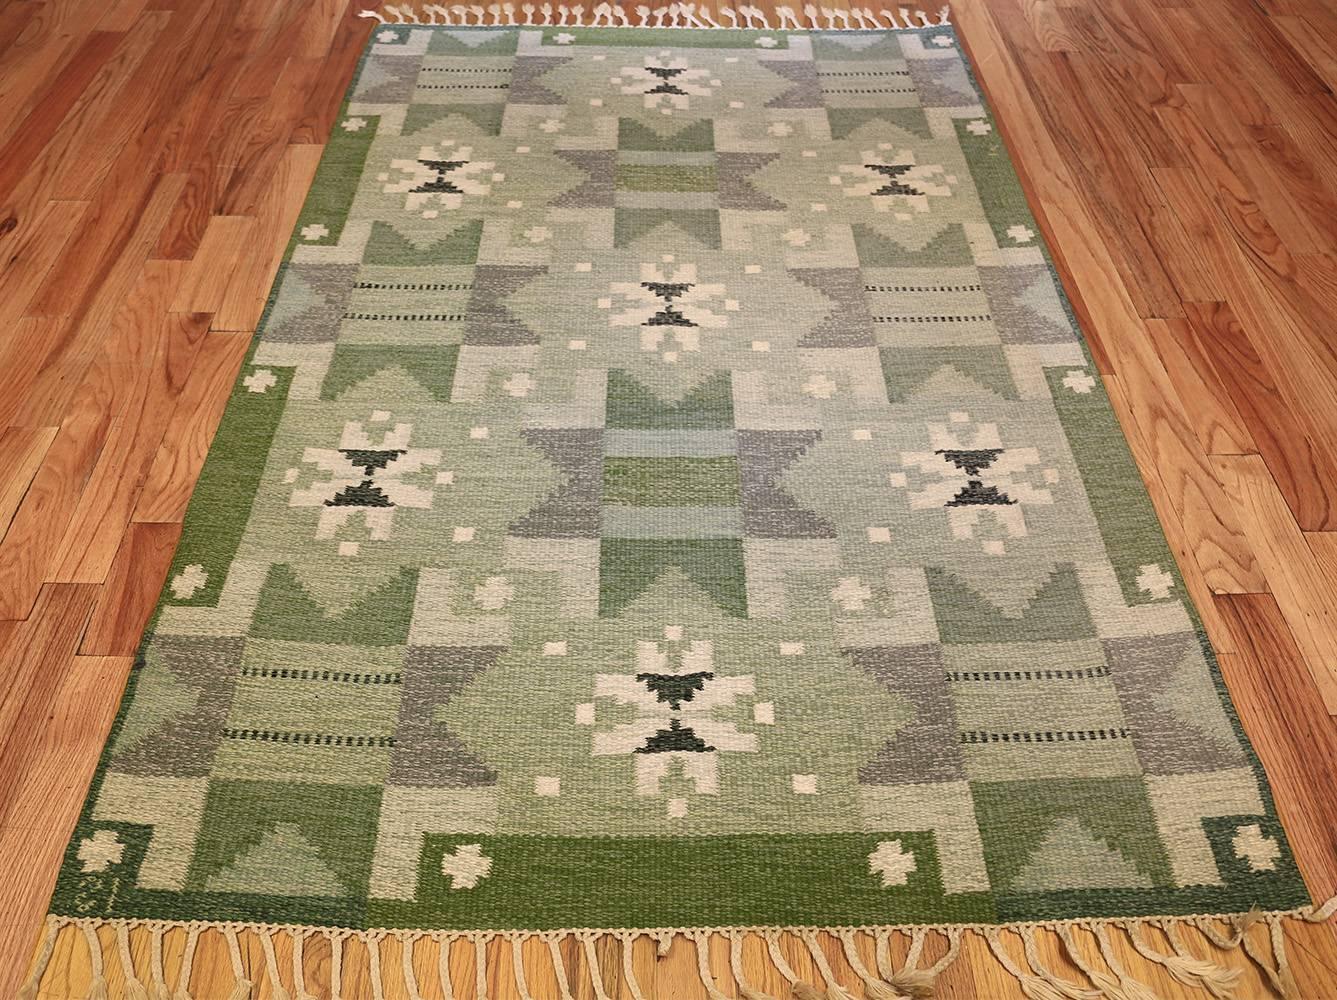 Beautiful green vintage Scandinavian Kilim rug by Ingegerd Silow 49469, country of origin / rug type: Scandinavia rug, date circa mid–20th century. Introduce your home’s interior design to warmth, texture, and comfort with this vintage Scandinavian